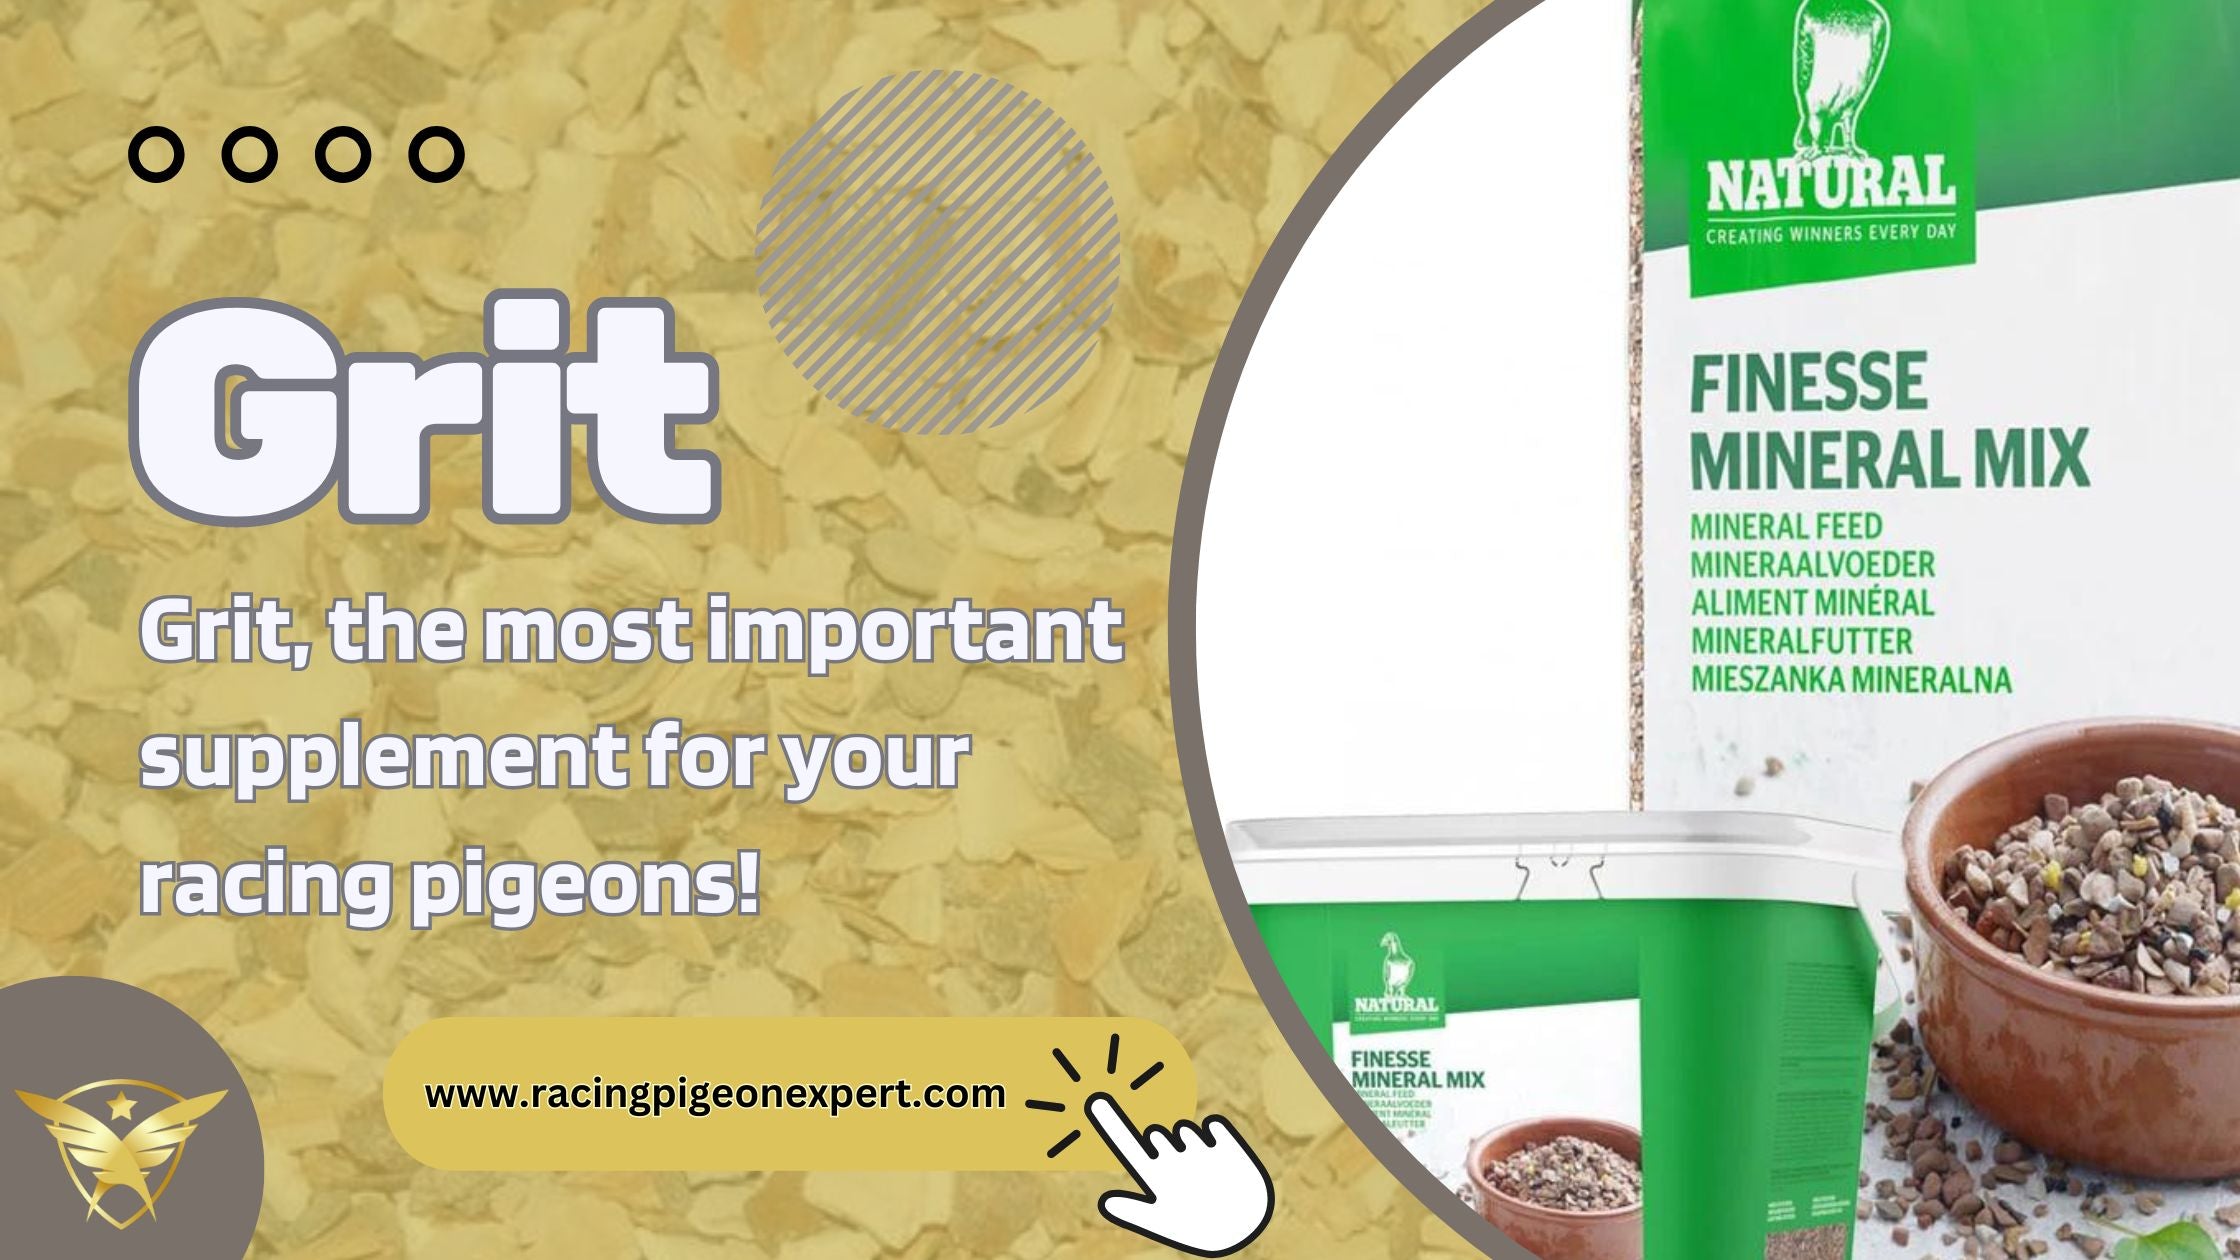 Grit, the most important supplement for your racing pigeons!